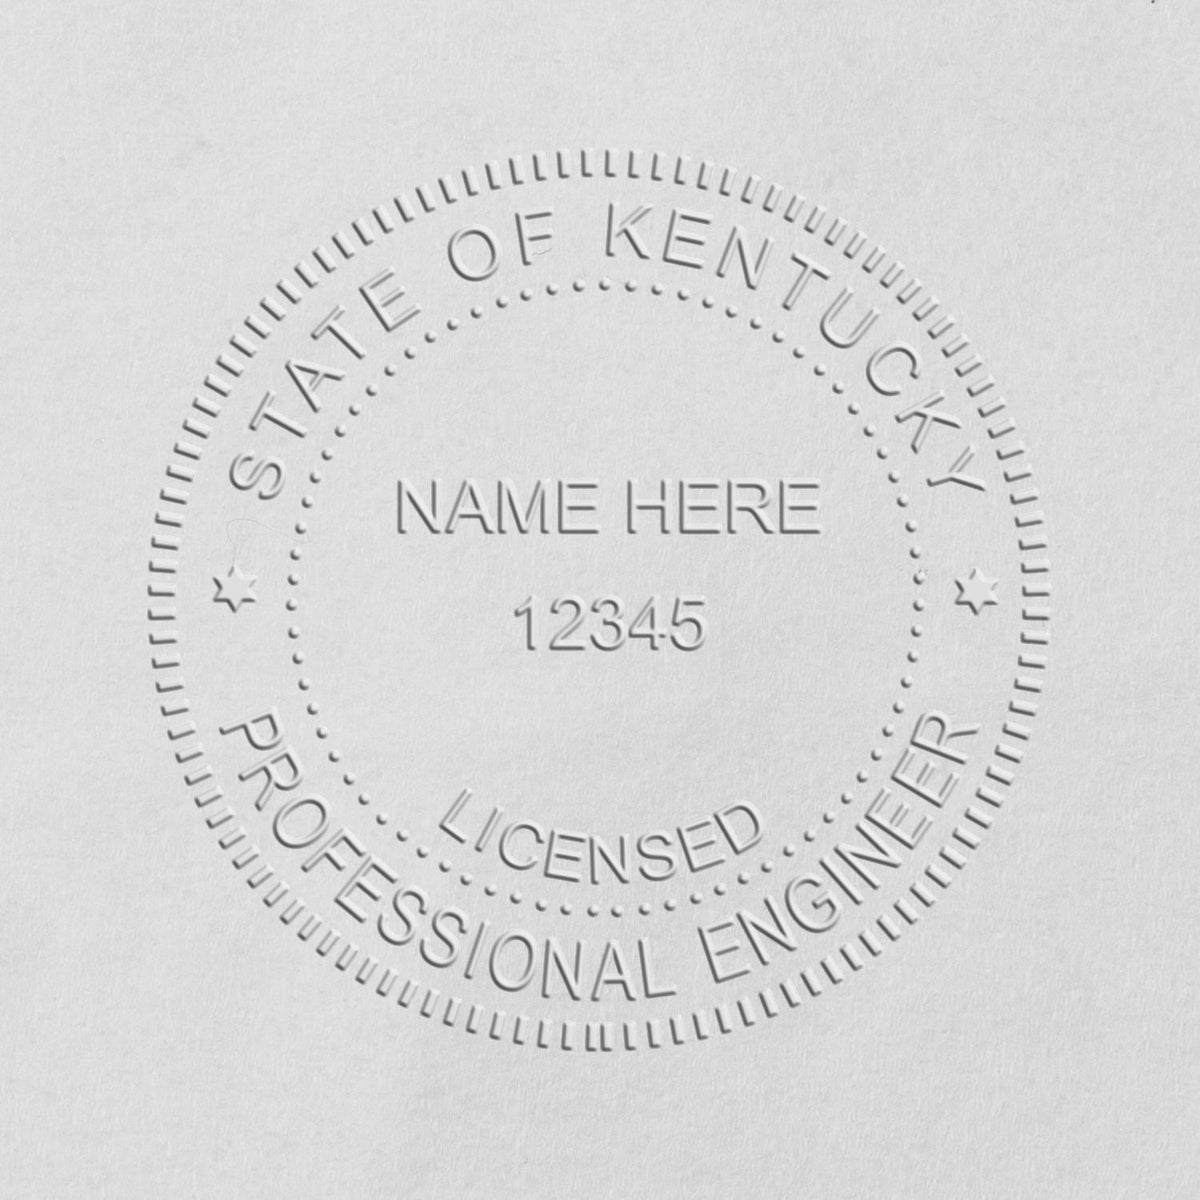 A photograph of the Soft Kentucky Professional Engineer Seal stamp impression reveals a vivid, professional image of the on paper.